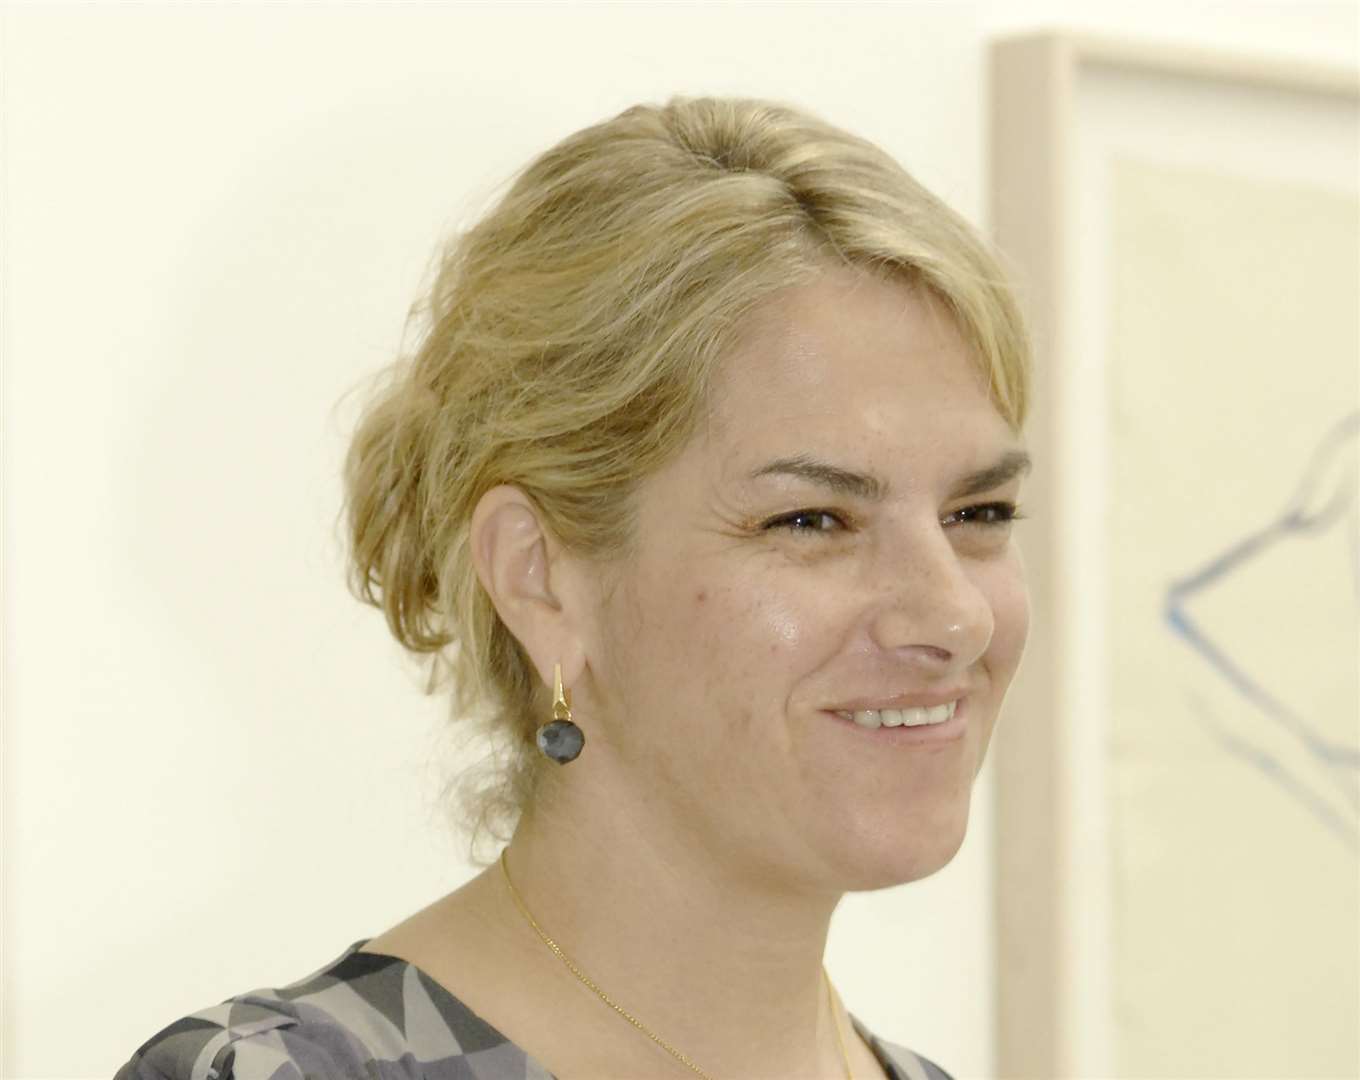 Tracey Emin's death mask will be put on display